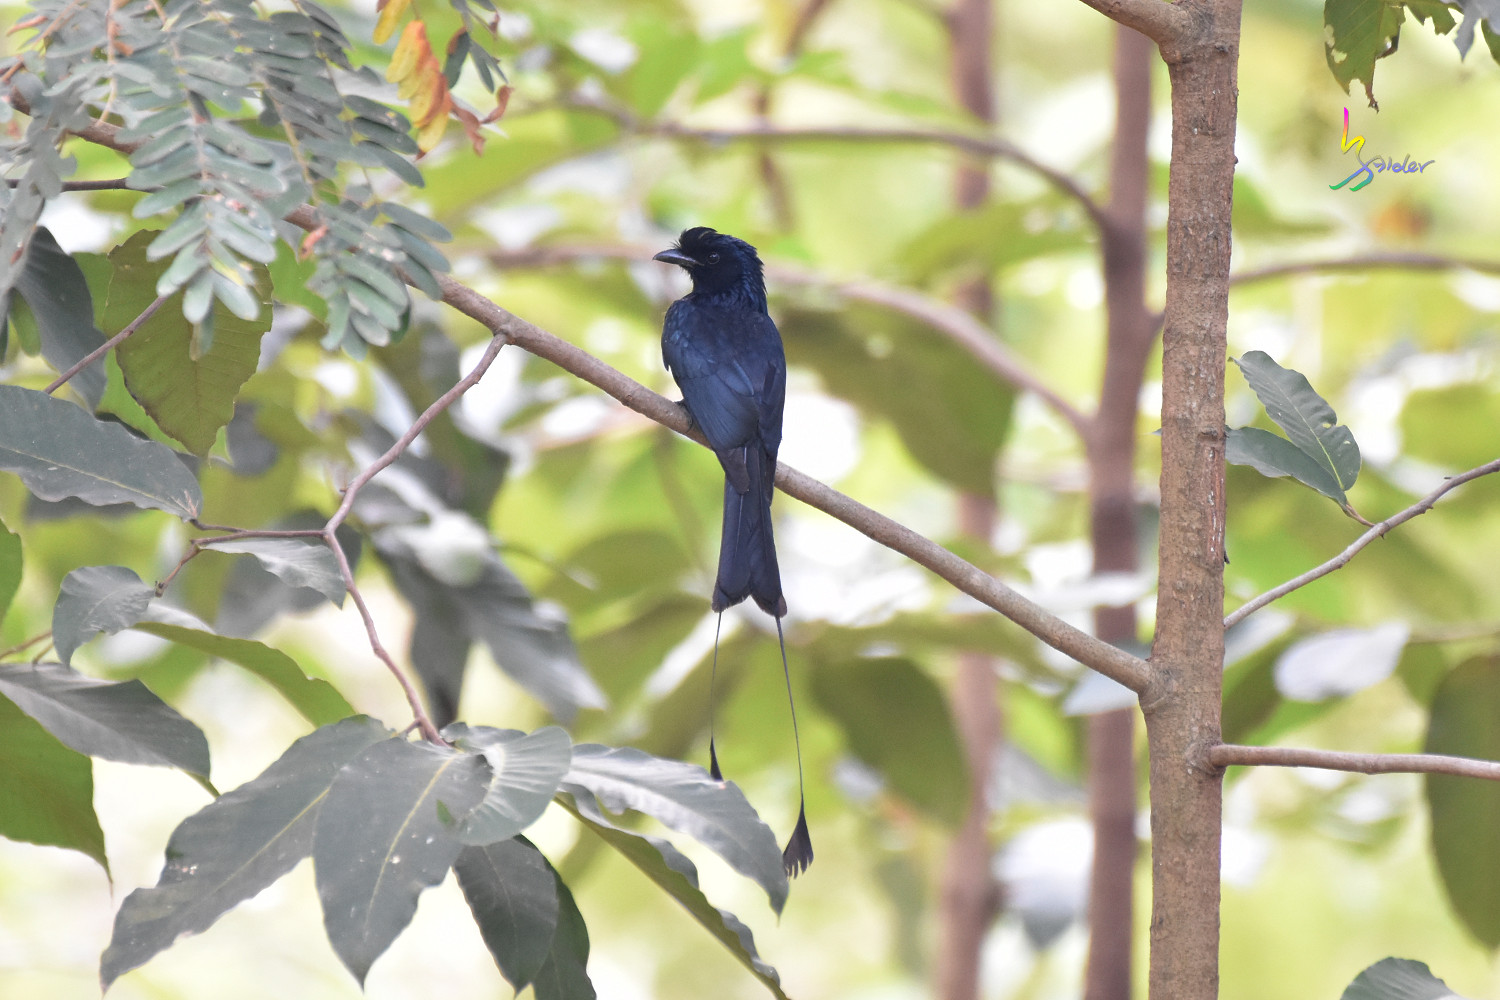 Greater_Racket-tailed_Drongo_3496